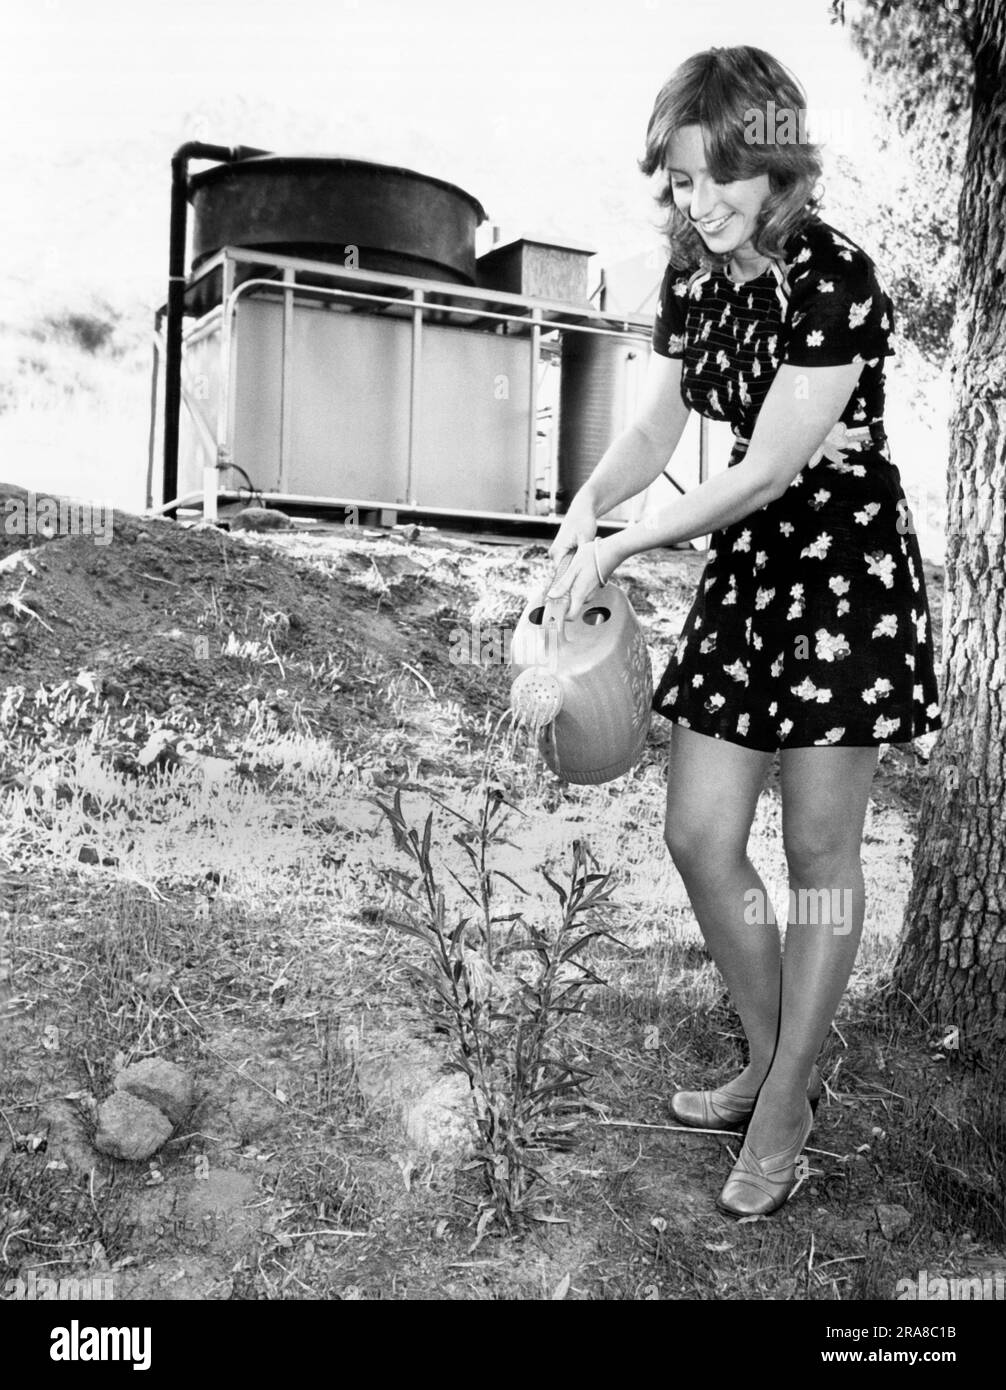 San Diego, California:  1974 A woman waters a seedling with raw sewage water that was converted to clean irrigation water by using nataural gases from the atmosphere instead of harmful chemicals. The process was developed by the Cubic Corporation which created the Hydrocube in the background. Stock Photo